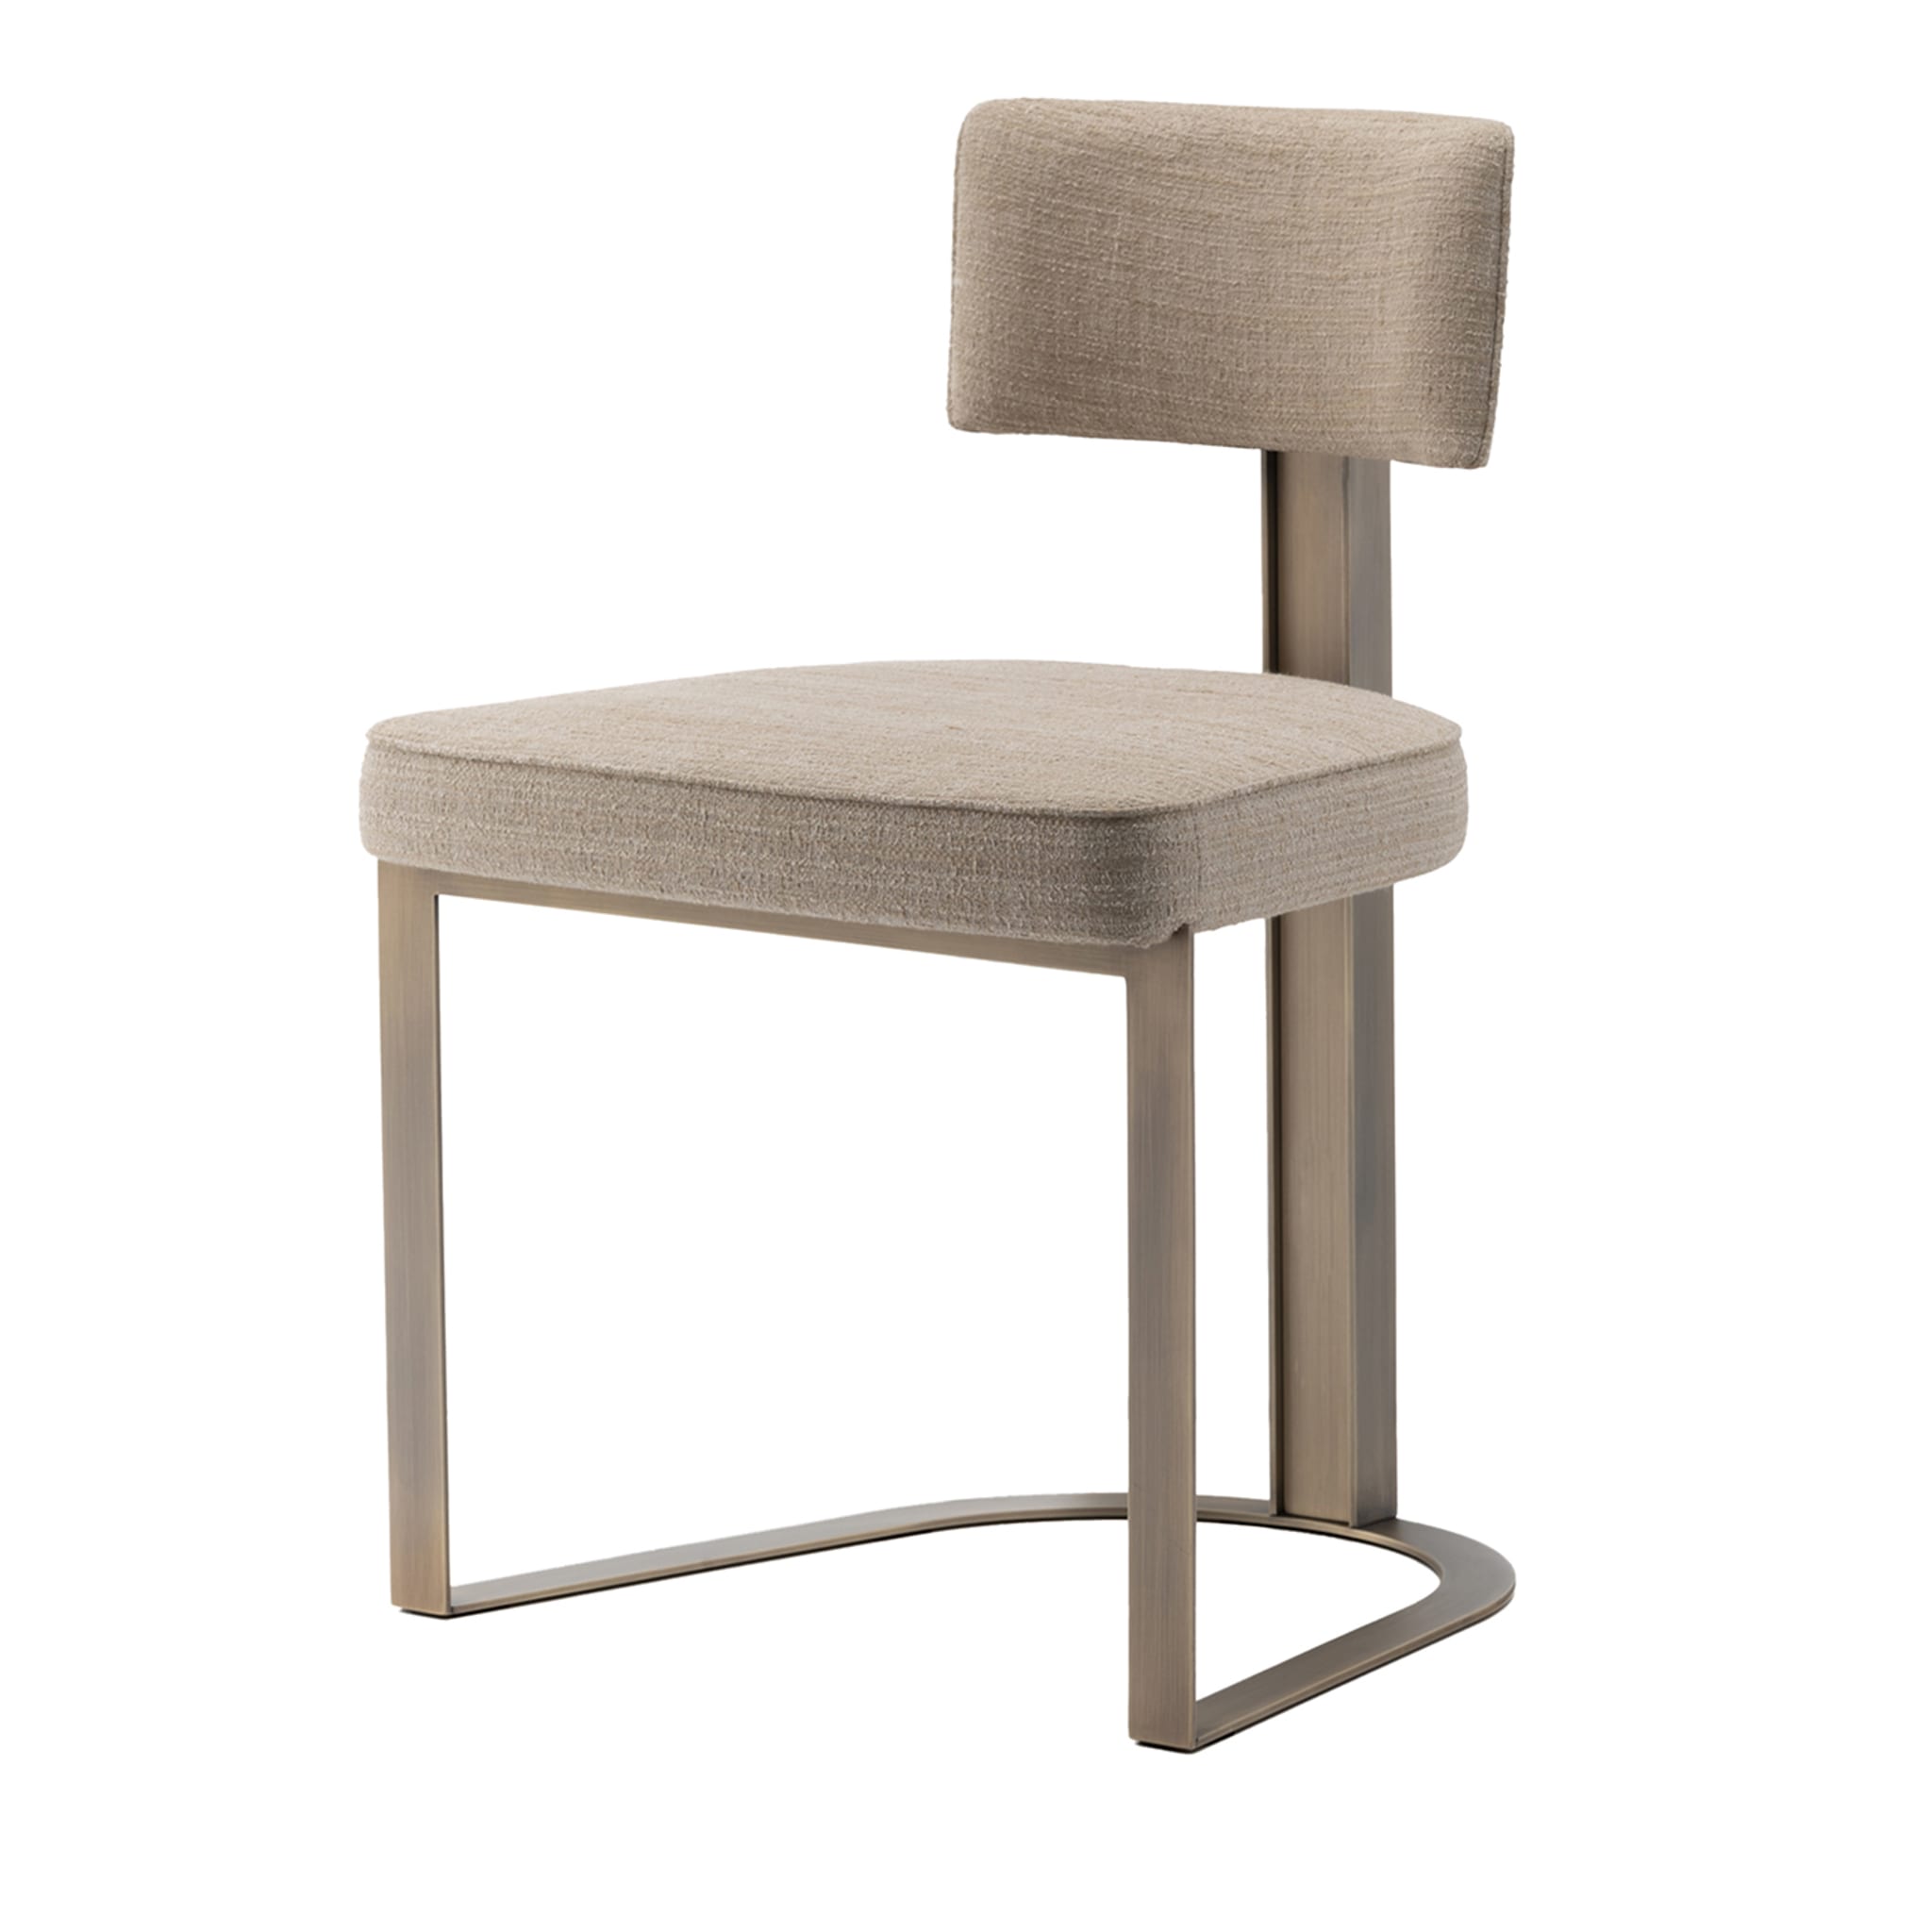 Sveva Burnished & Beige Chair with Horn Inlays - Main view